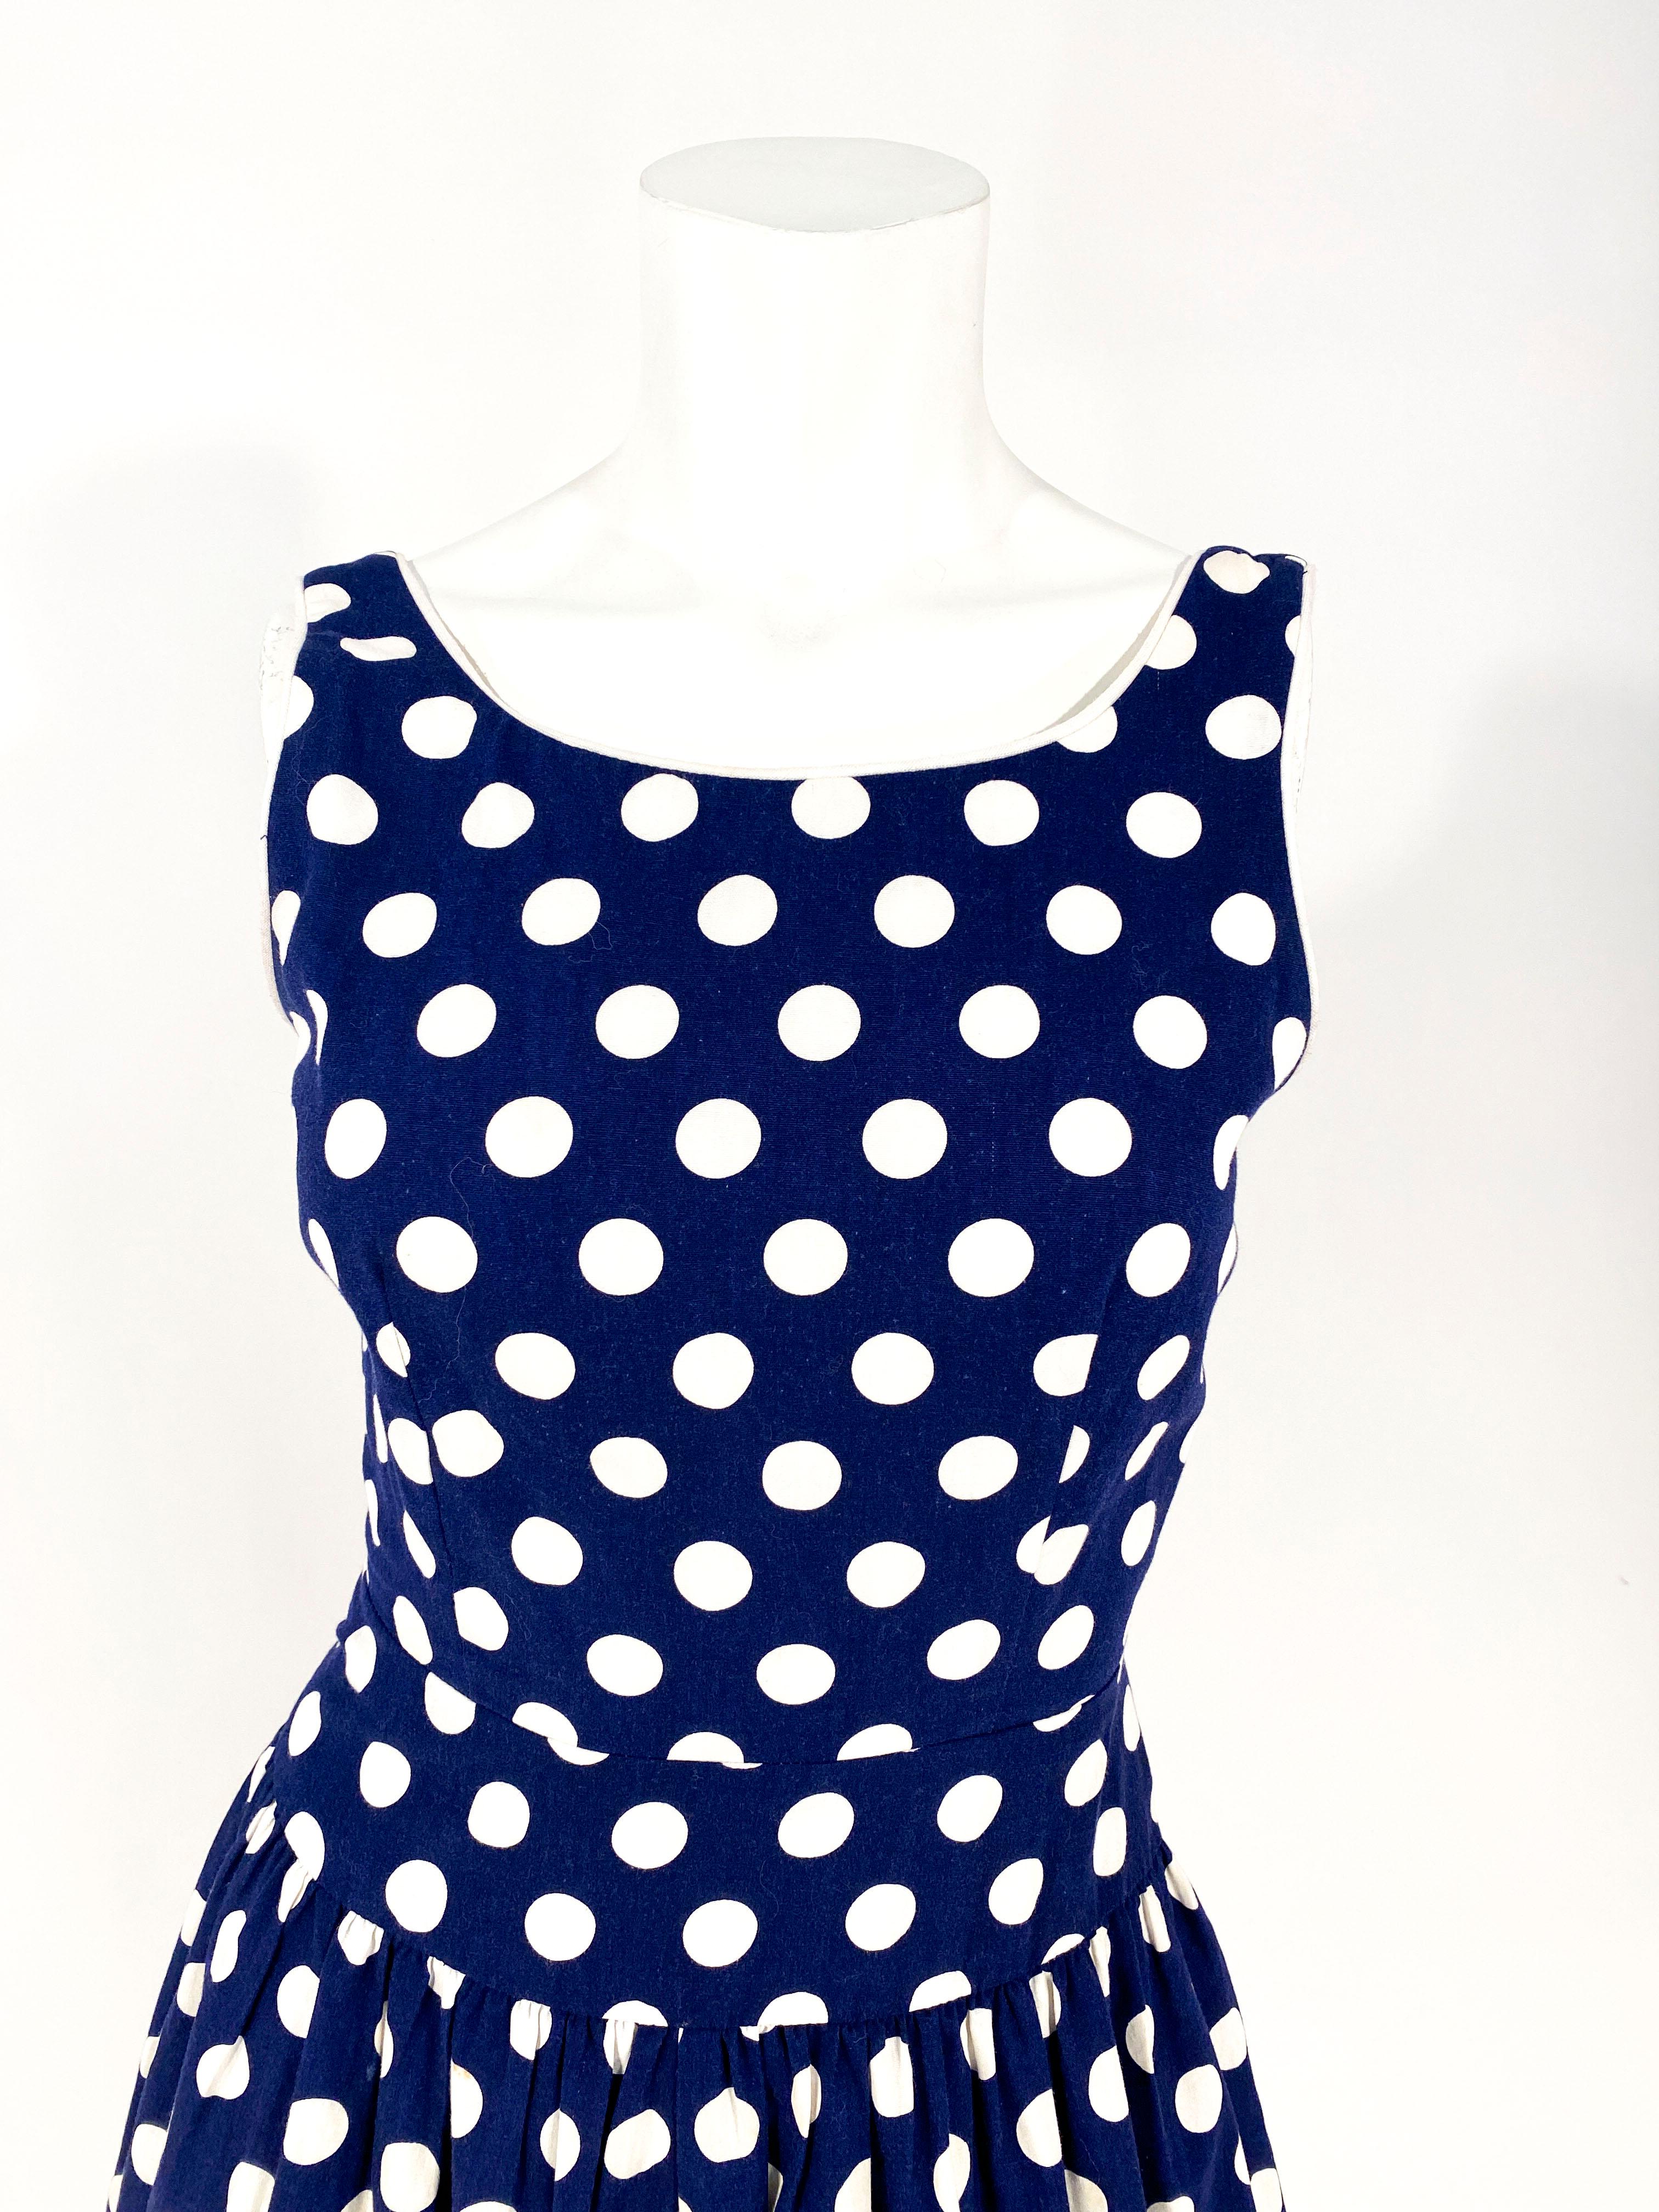 1960s Lanz navy blue cotton dress featuring bold white polka-dots, a drop waist line, in-set cummerbund, full tea length skirt, scoop neckline, low backline, and white contrasting piping along got neck and arms. This dress has been styled and